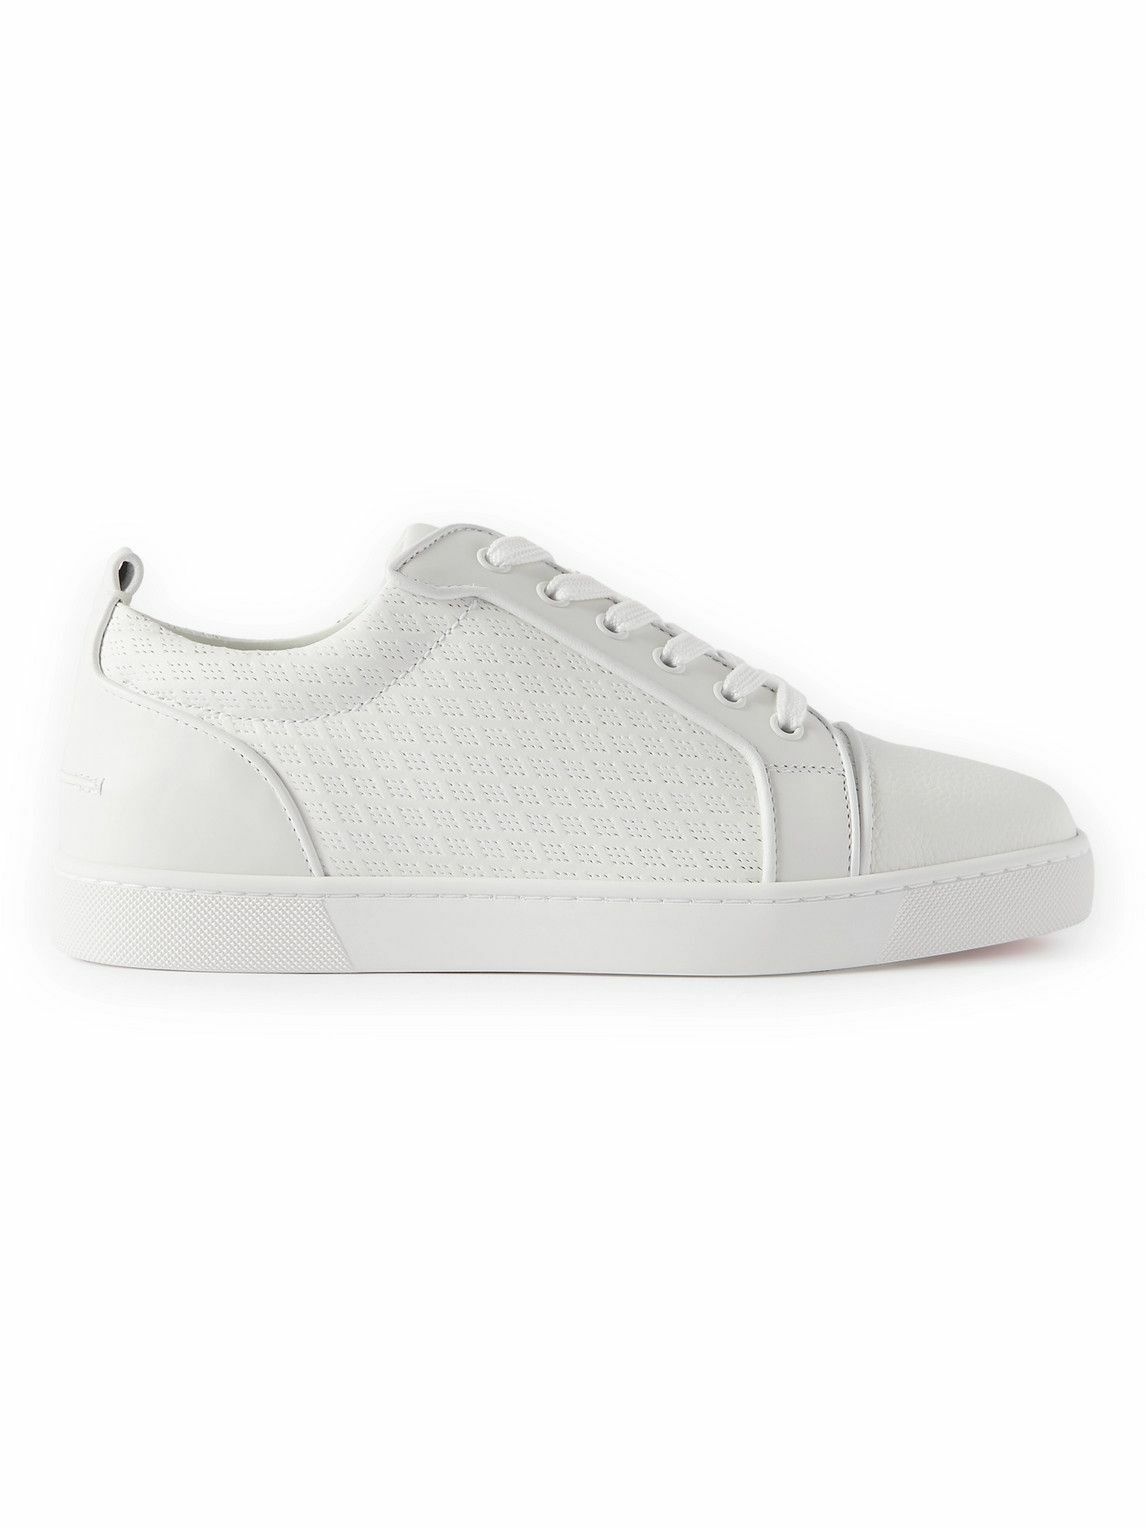 Christian Louboutin - Louis Junior Orlato Perforated Leather Sneakers ...